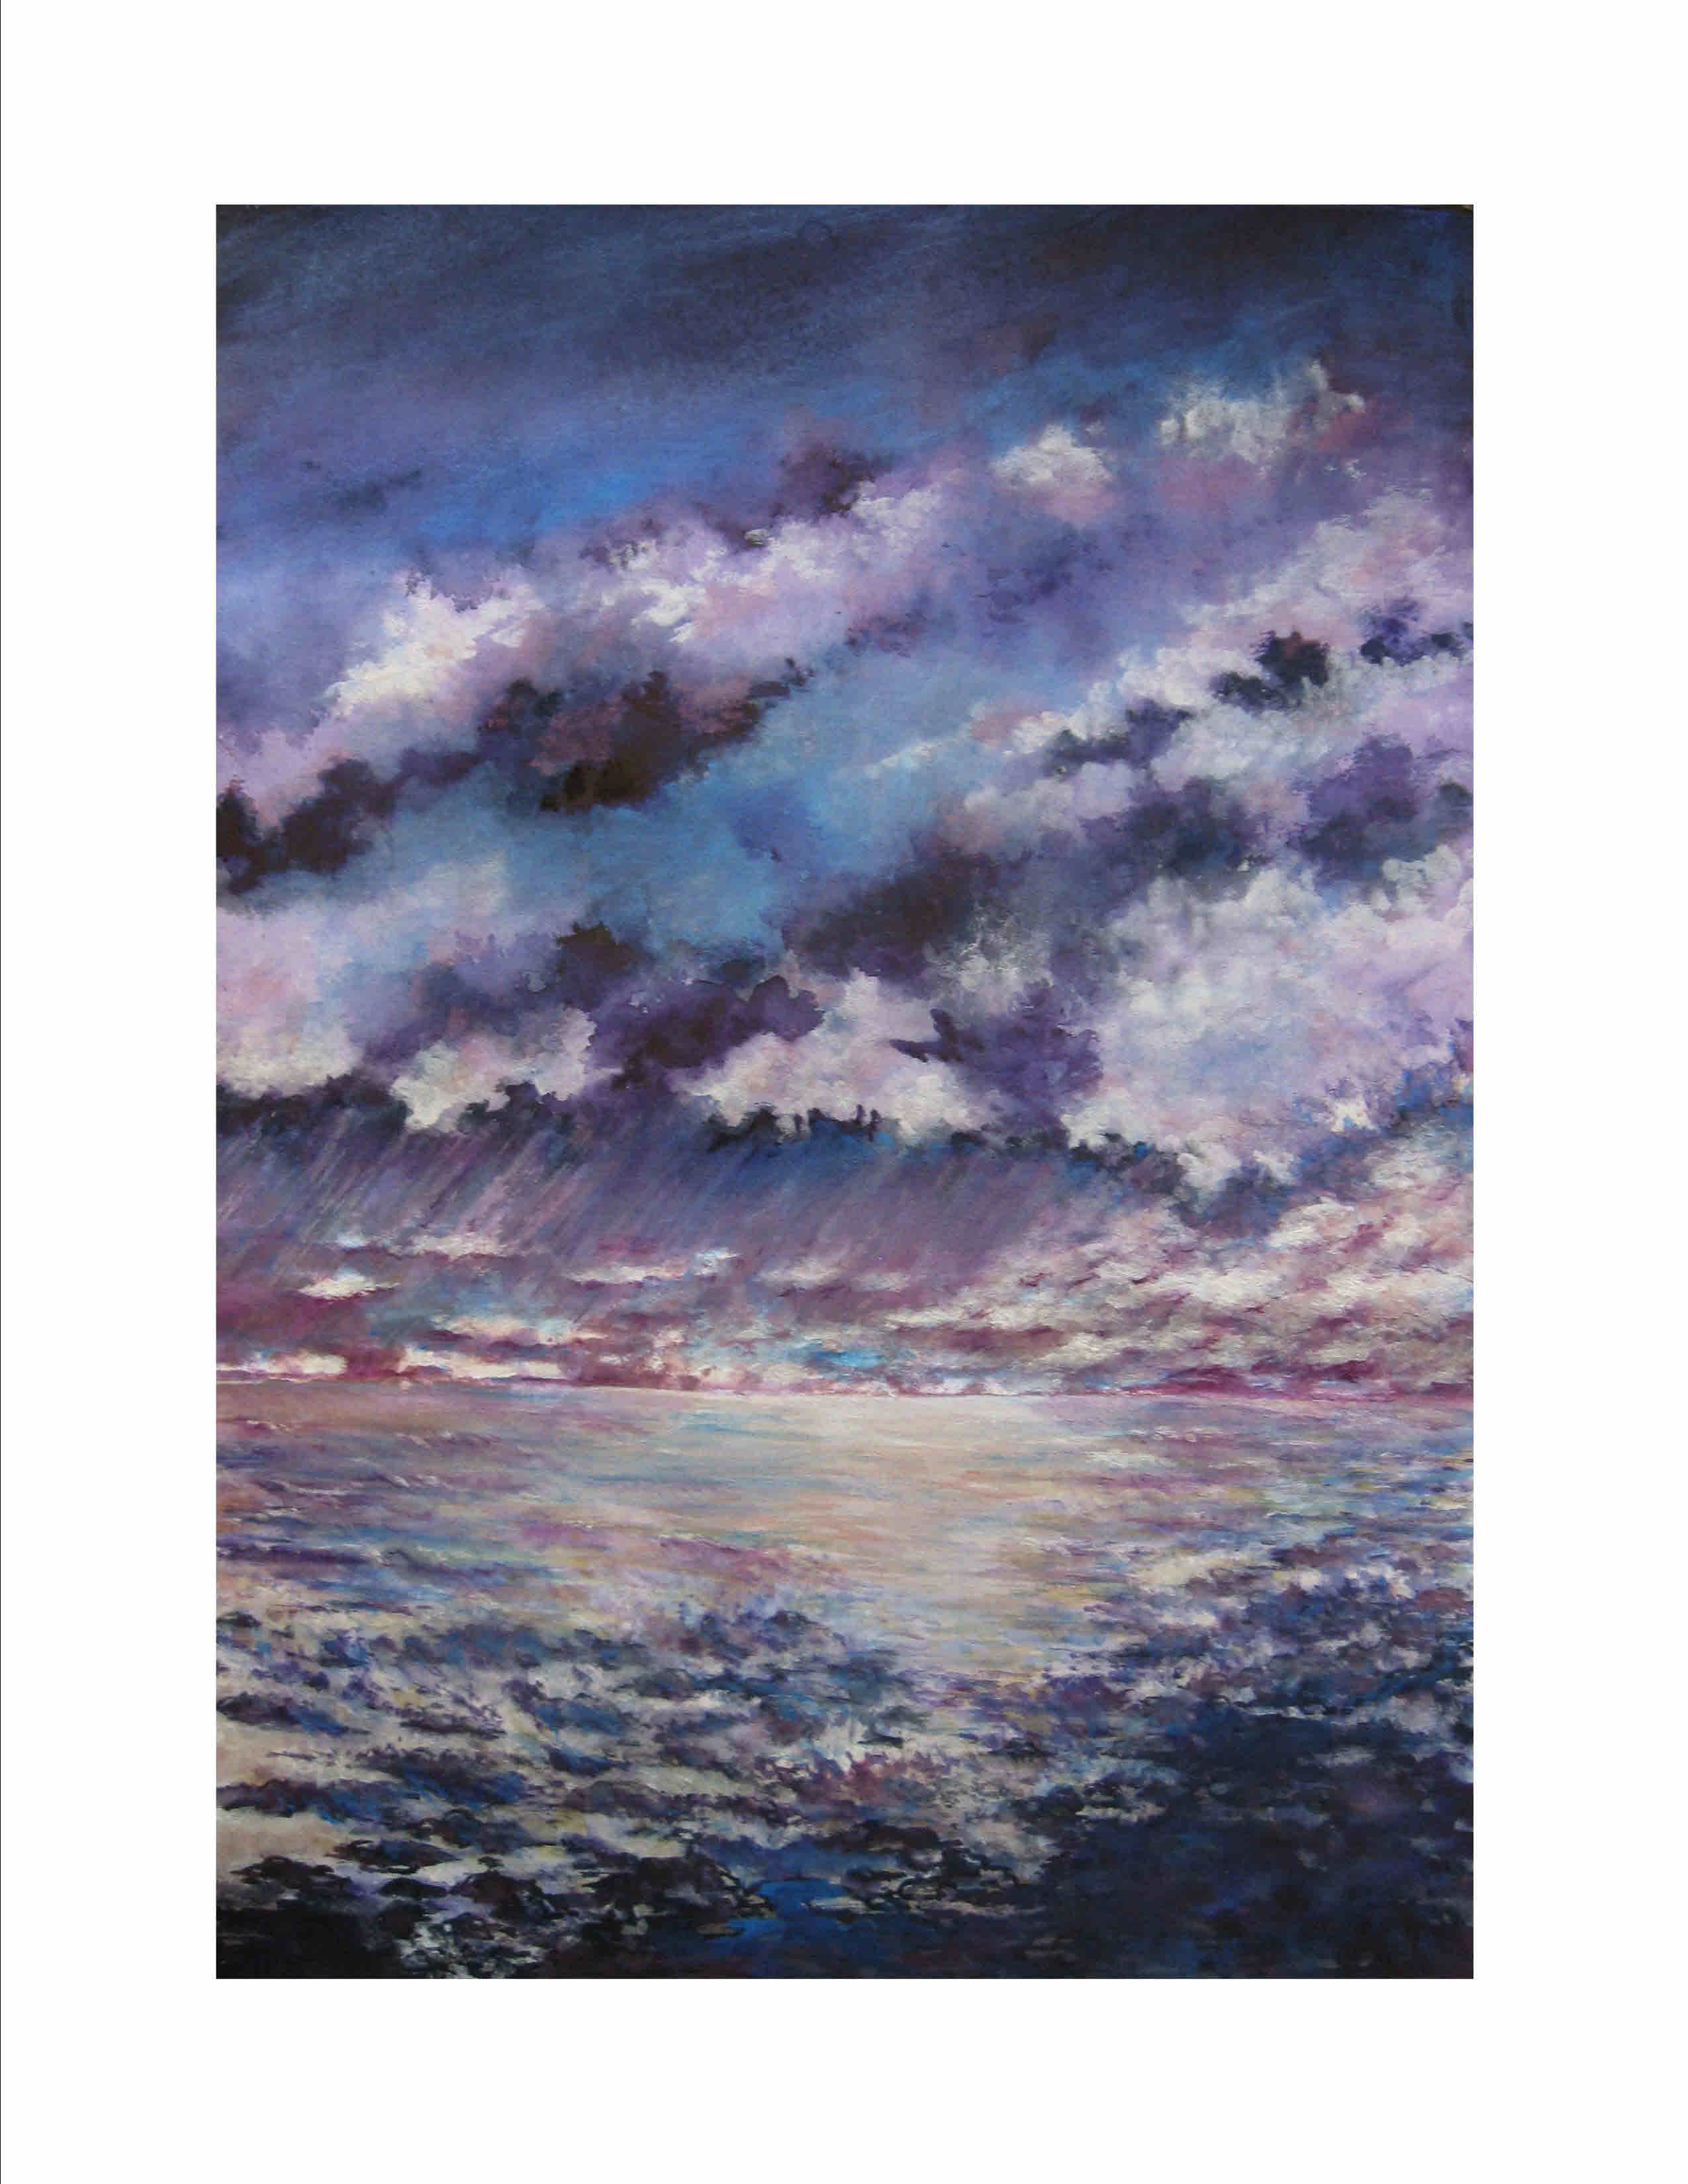 PURPLE SKY WITH STORM CLOUDS 2